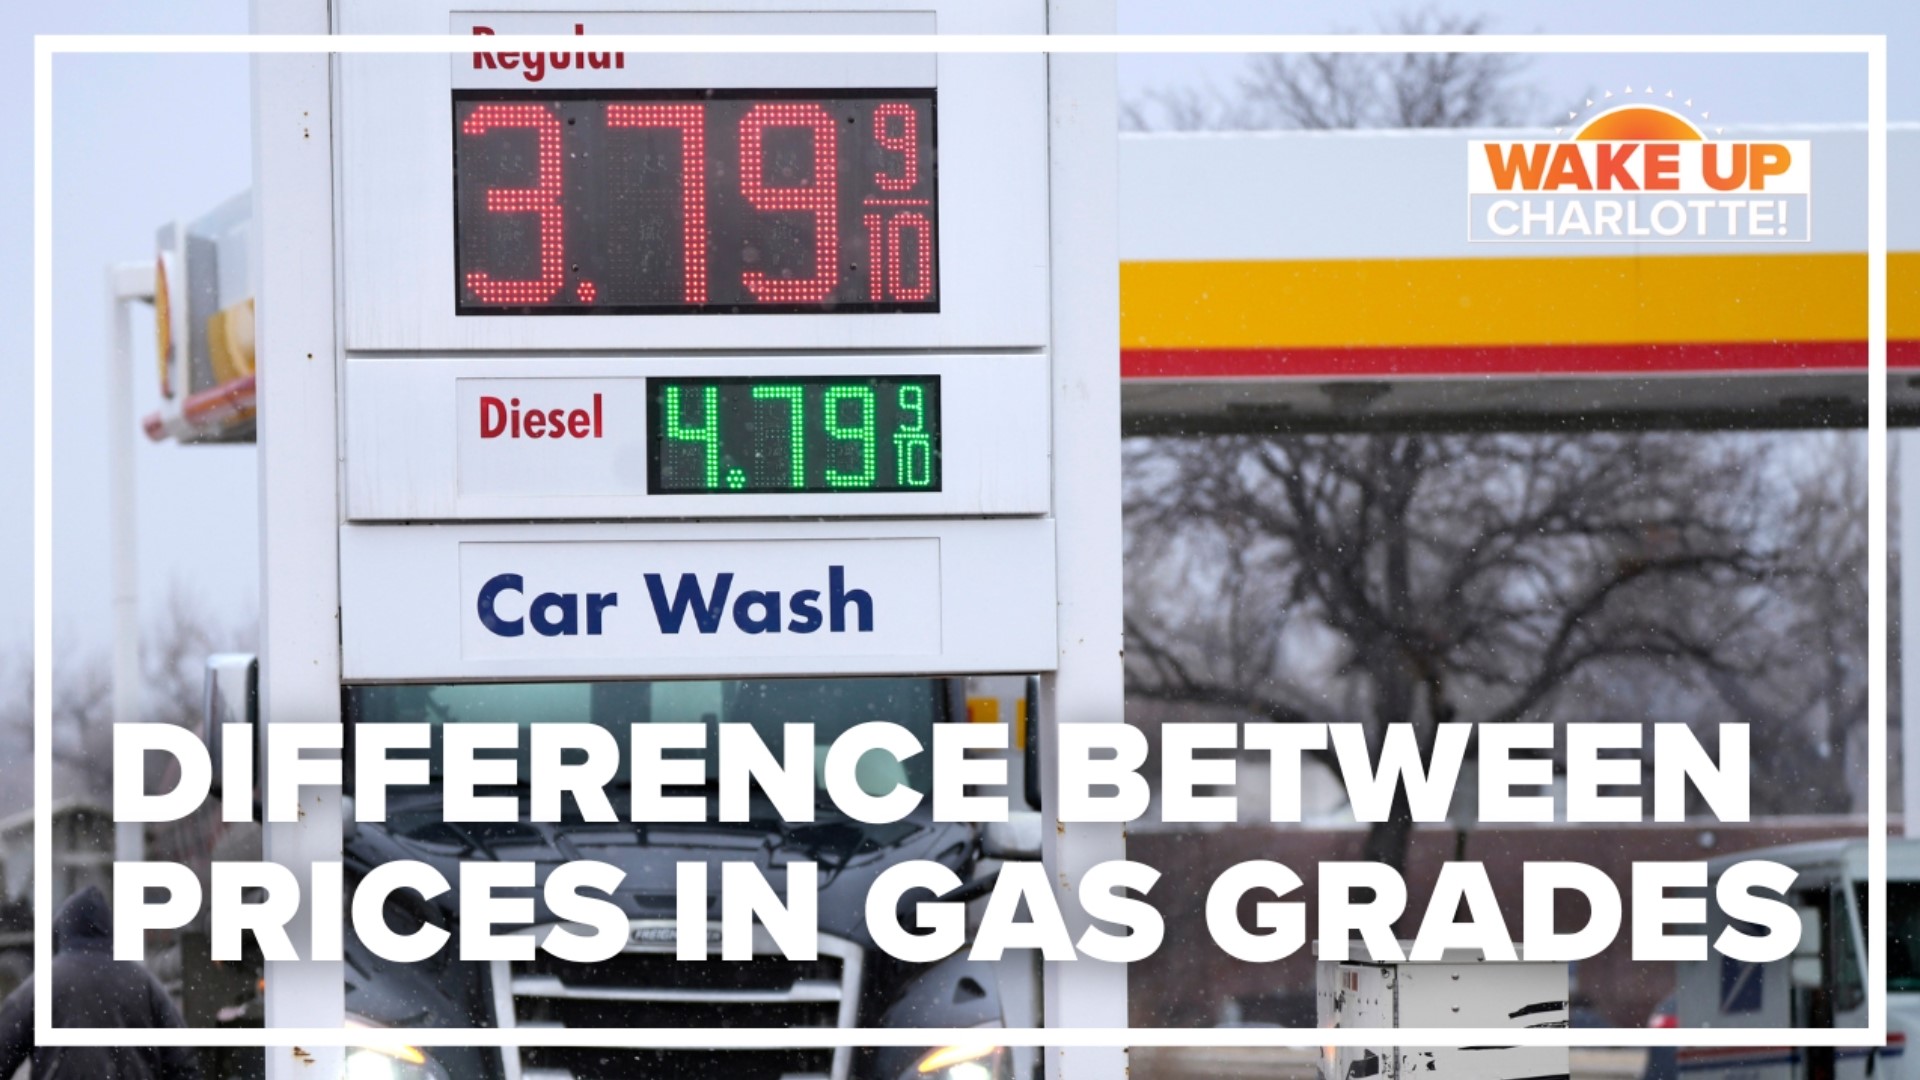 This morning the average price for regular gas in North Carolina is $4.61, while premium is at a whopping $5.33.